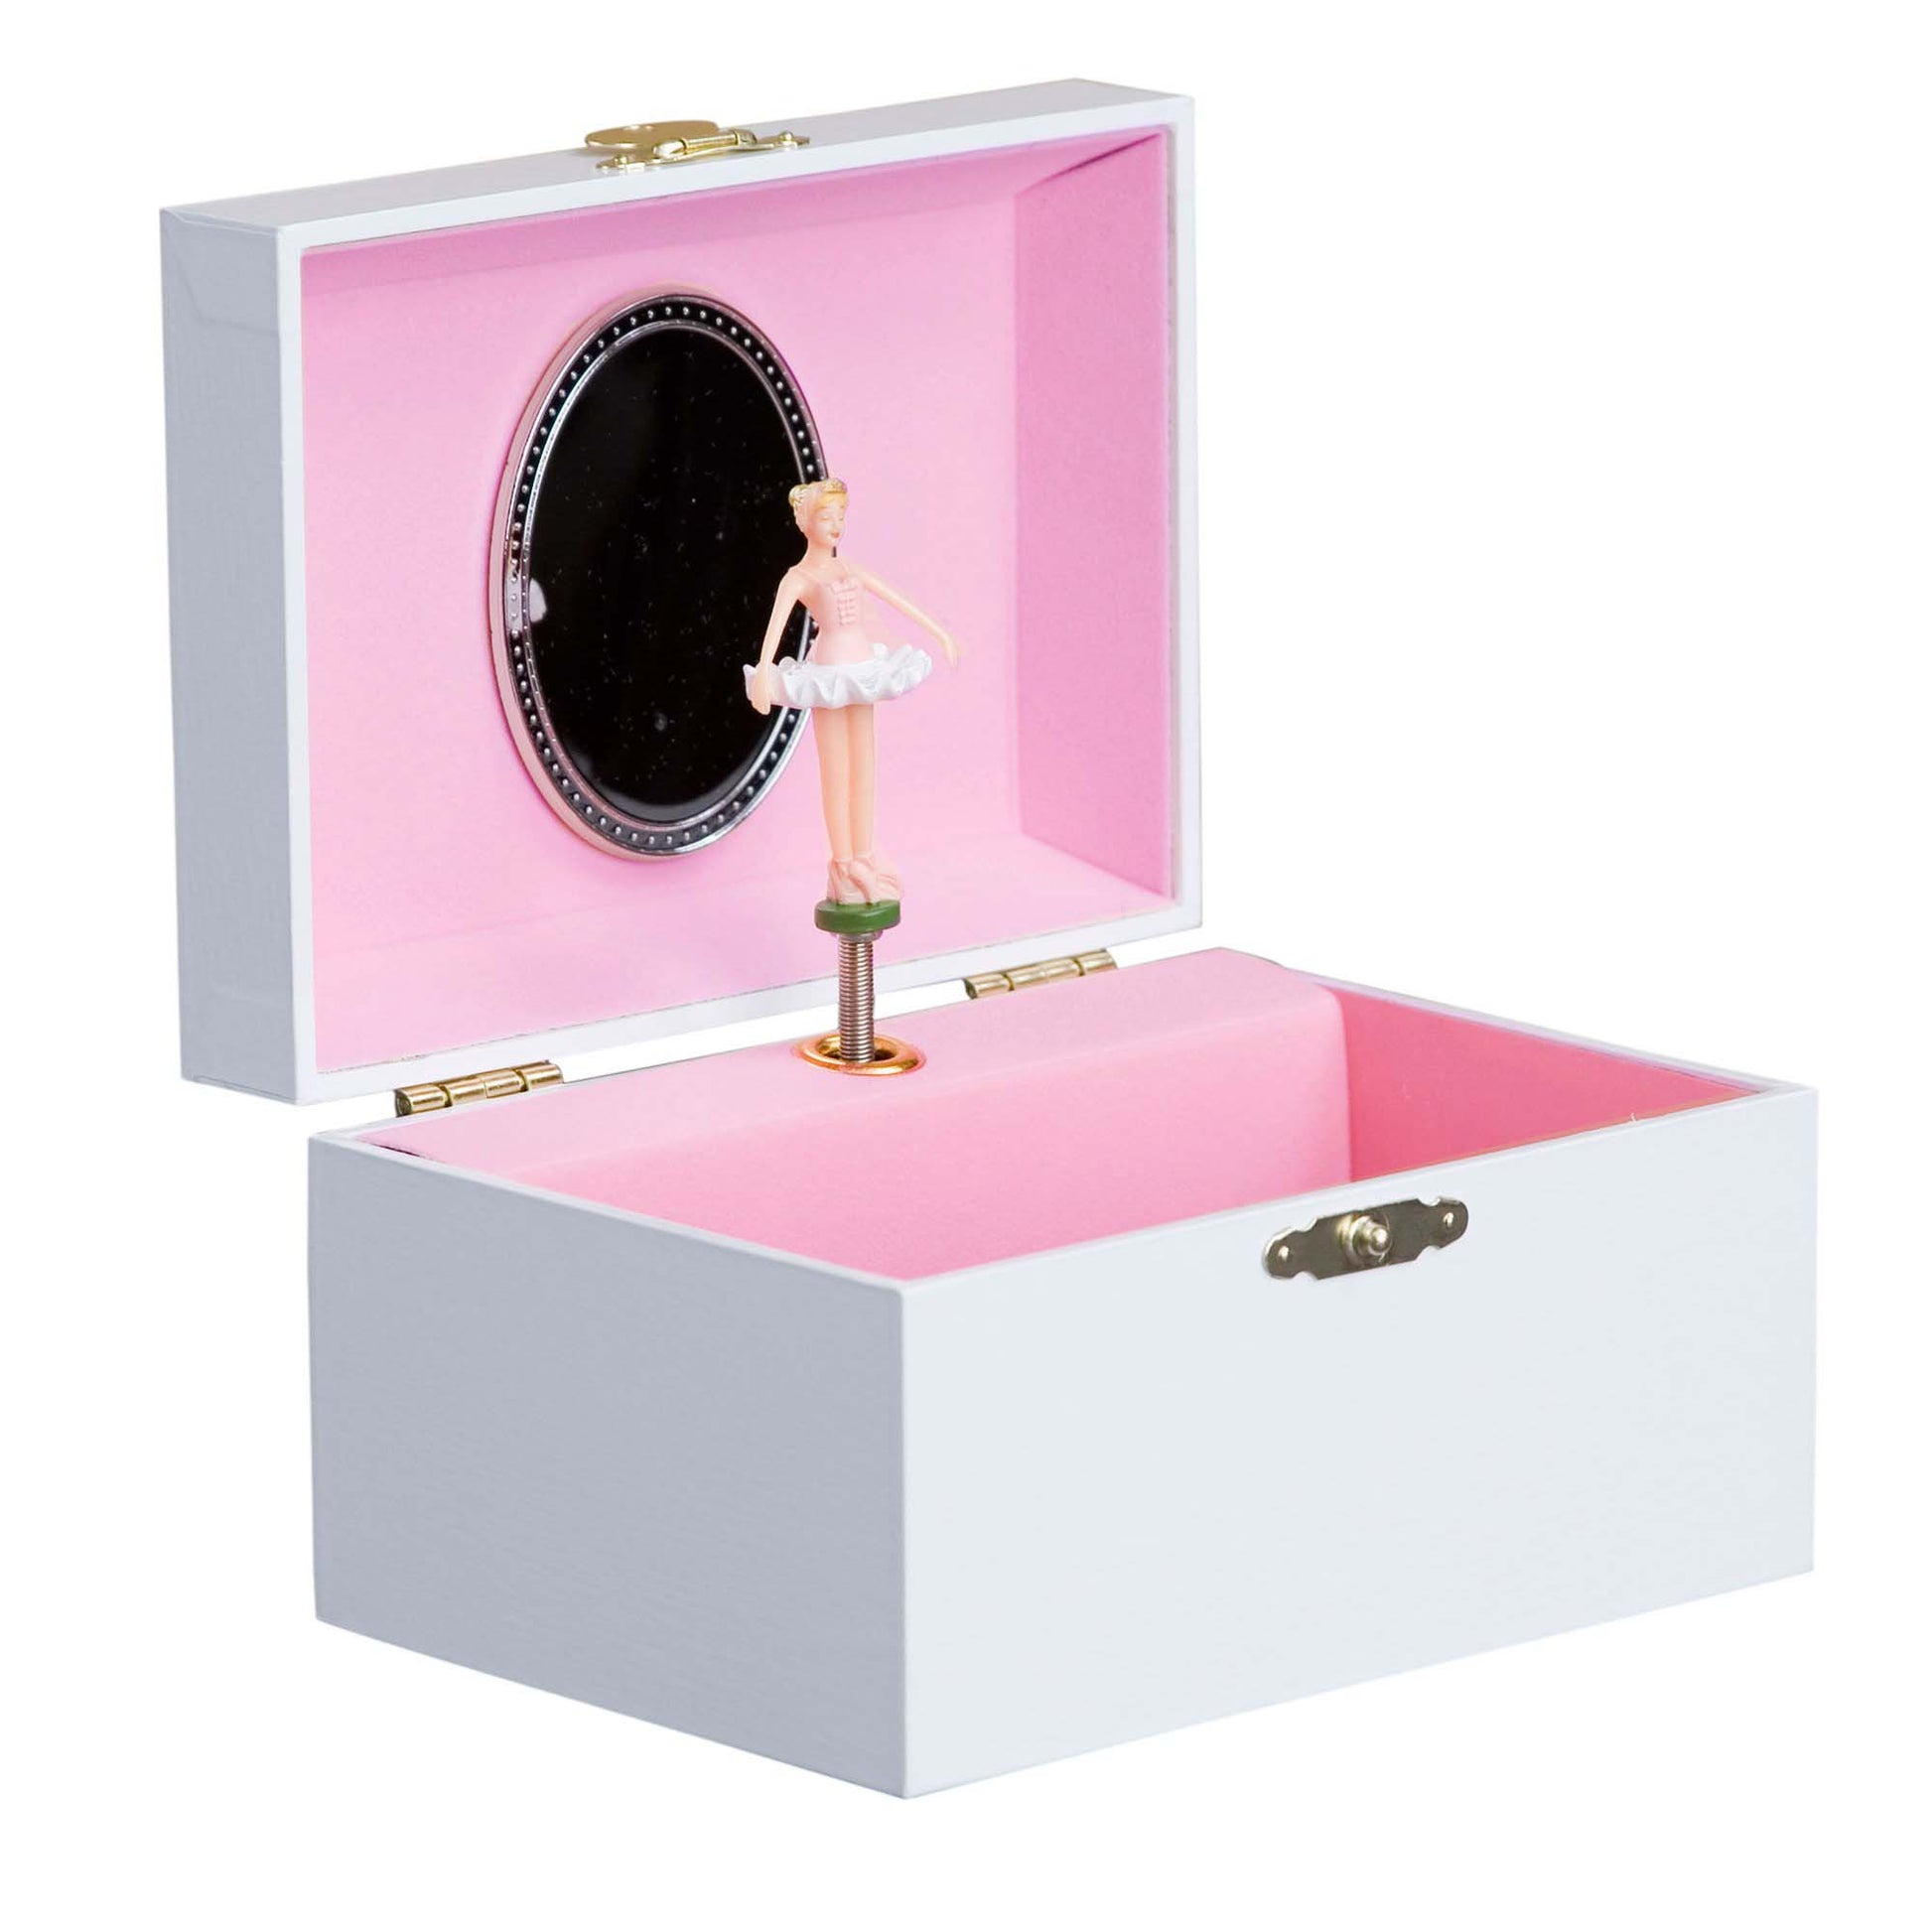 Personalized Ballerina Jewelry Box with Pink Teal Princess Castle design